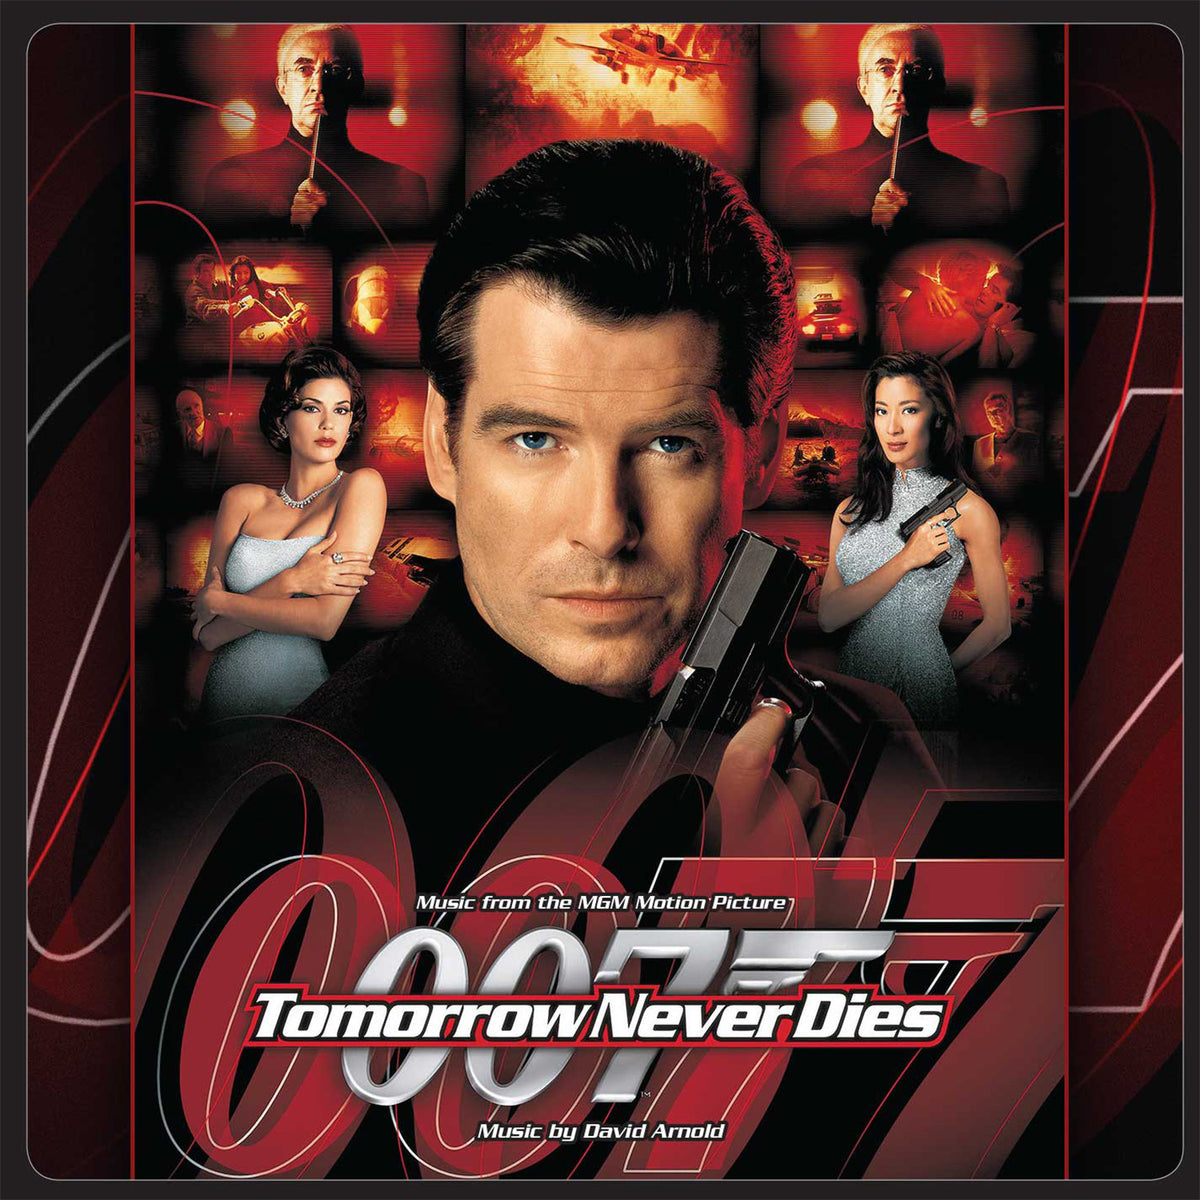 James Bond Tomorrow Never Dies Soundtrack Double CD Set - Expanded Remastered Edition